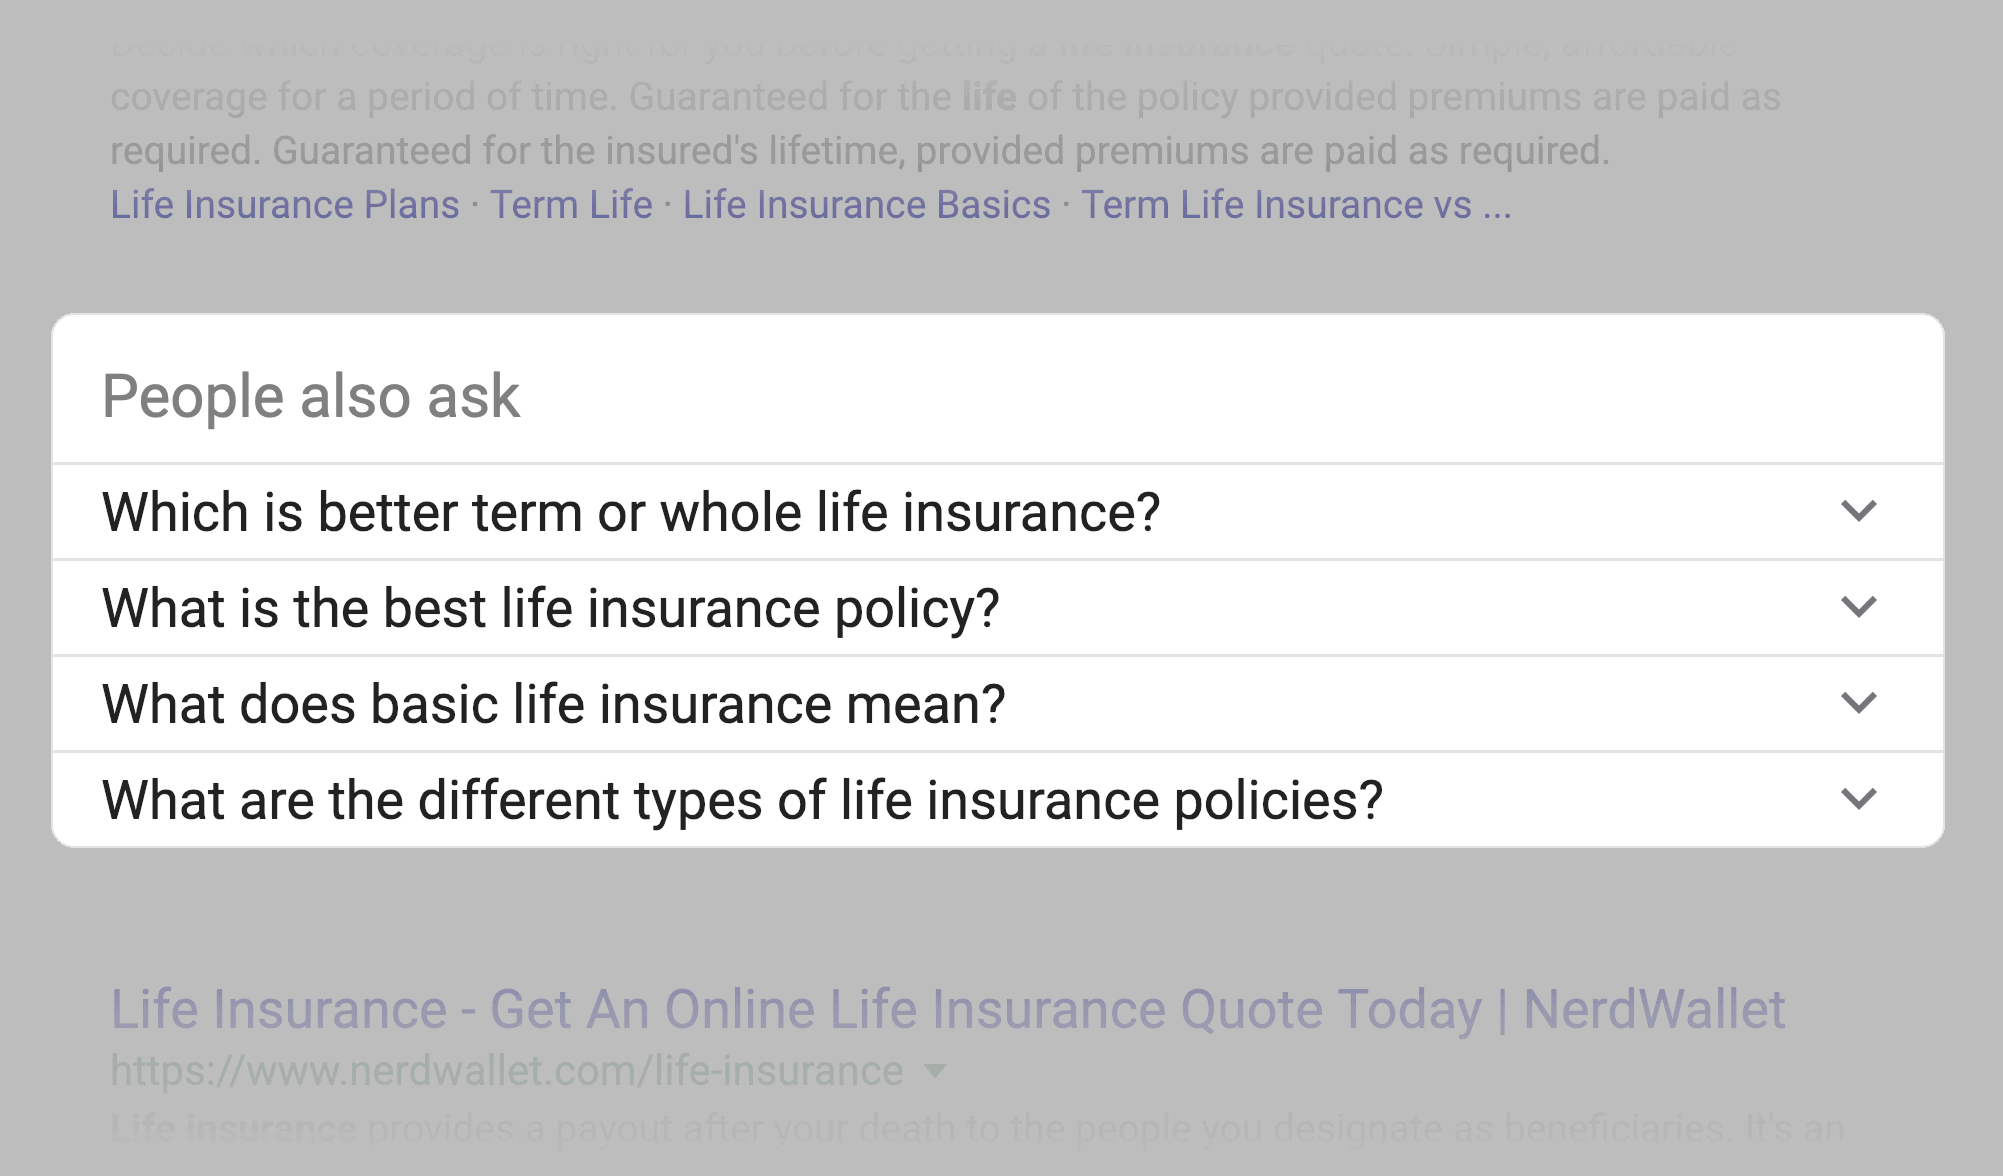 "life insurance" SERPs – "People also ask" box